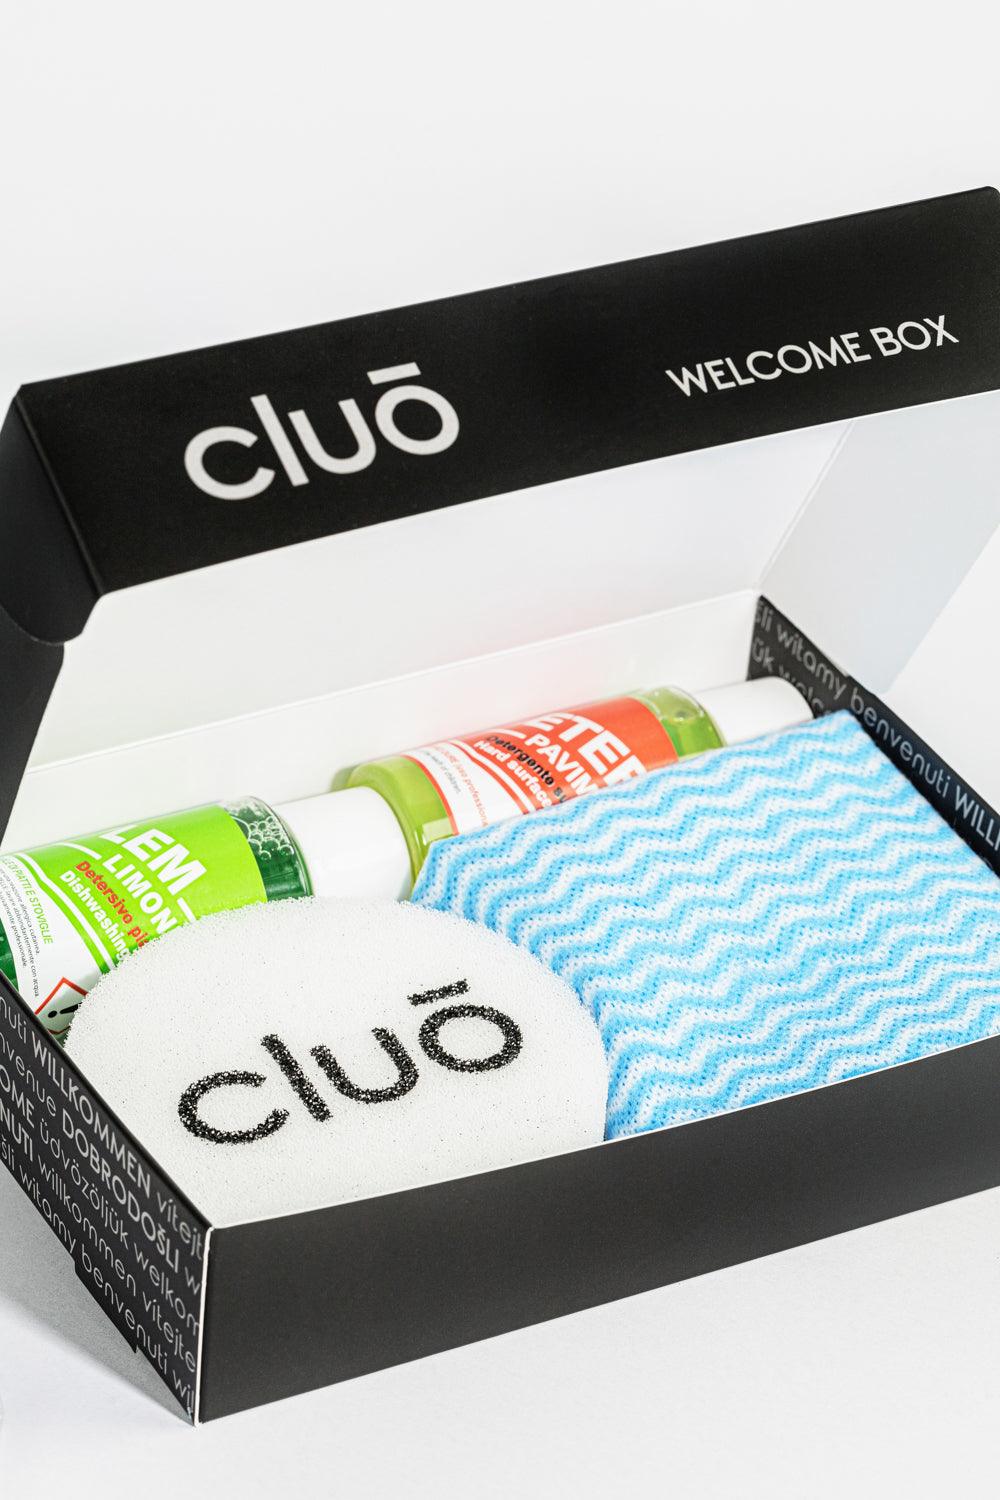 CLUO WELCOME BOX   3    *                                                                         (33.15  KN)